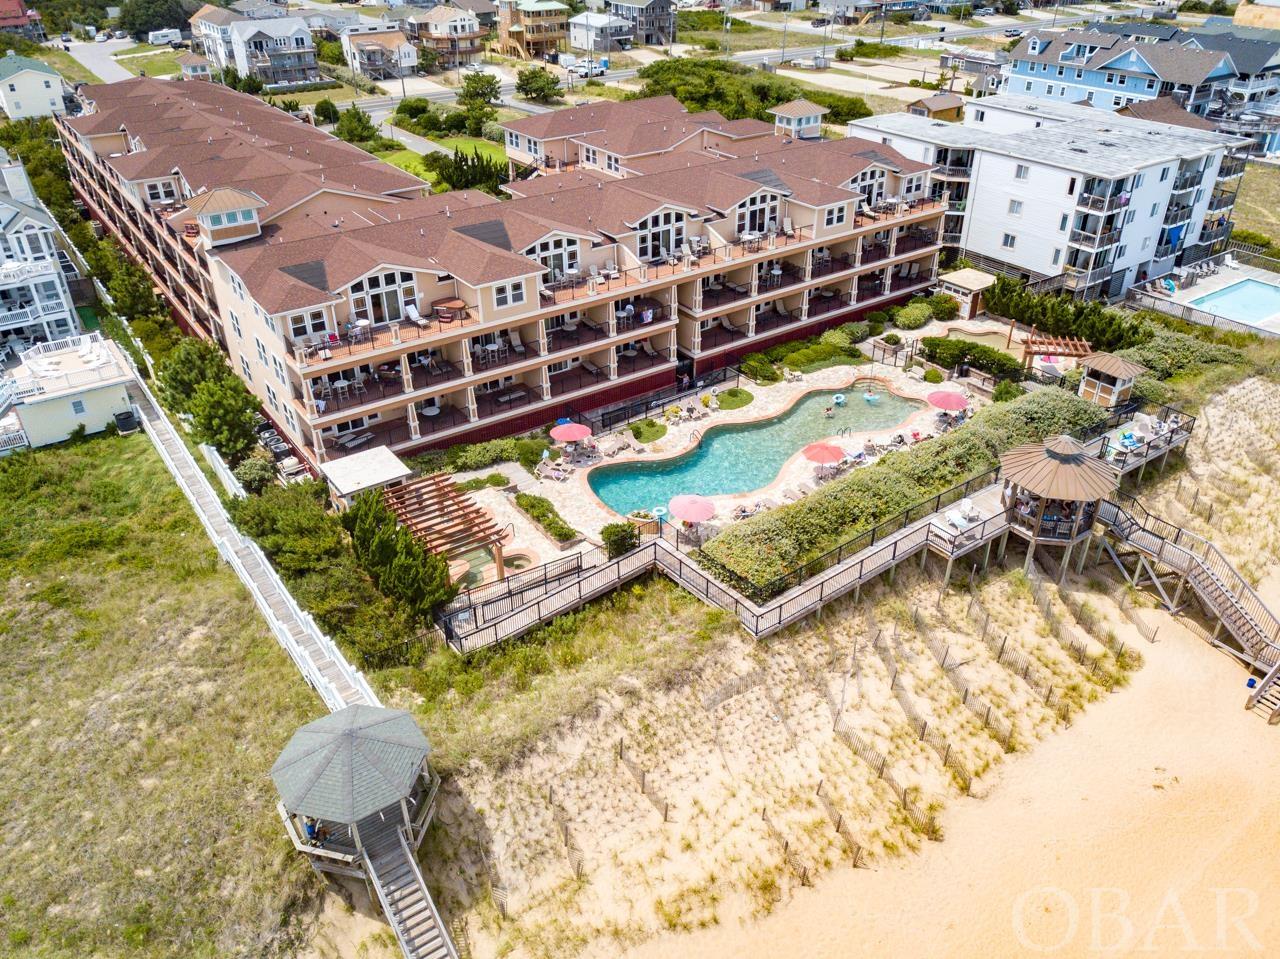 The Croatan Surf Club, the Prestigious Oceanfront Resort Community located on the Beautiful Beaches of the Outer Banks of North Carolina. This first class community boasts all the amenities one could desire for a fabulous beach vacation. Now available located top floor with convenient one level living, this 3 bedroom/3 bath flat has upgraded appointments throughout. Included are hardwood floors, custom tile, granite countertops, electric fireplace and much much more and yes the great ocean views from the large private sun deck overlooking the dunes and the Atlantic Ocean. Exquisitely furnished for ones immediate enjoyment, either as a place to call home at the beach, for the discriminating vacationer or great investment property. The amenities at the Croatan are as a First Class resort should be with a tremendous 84' long custom oceanfront pool, separate children's pool with spay ground, large outdoor hot tub/spa area and dune-top boardwalks with gazebo which all lead down to the sand and waters of the Atlantic Ocean. Also, indoor amenities include an heated pool with hot tub/spa and fitness room which are open year round. Schedule a showing today and see all that the Croatan Surf Club has to offer!!!